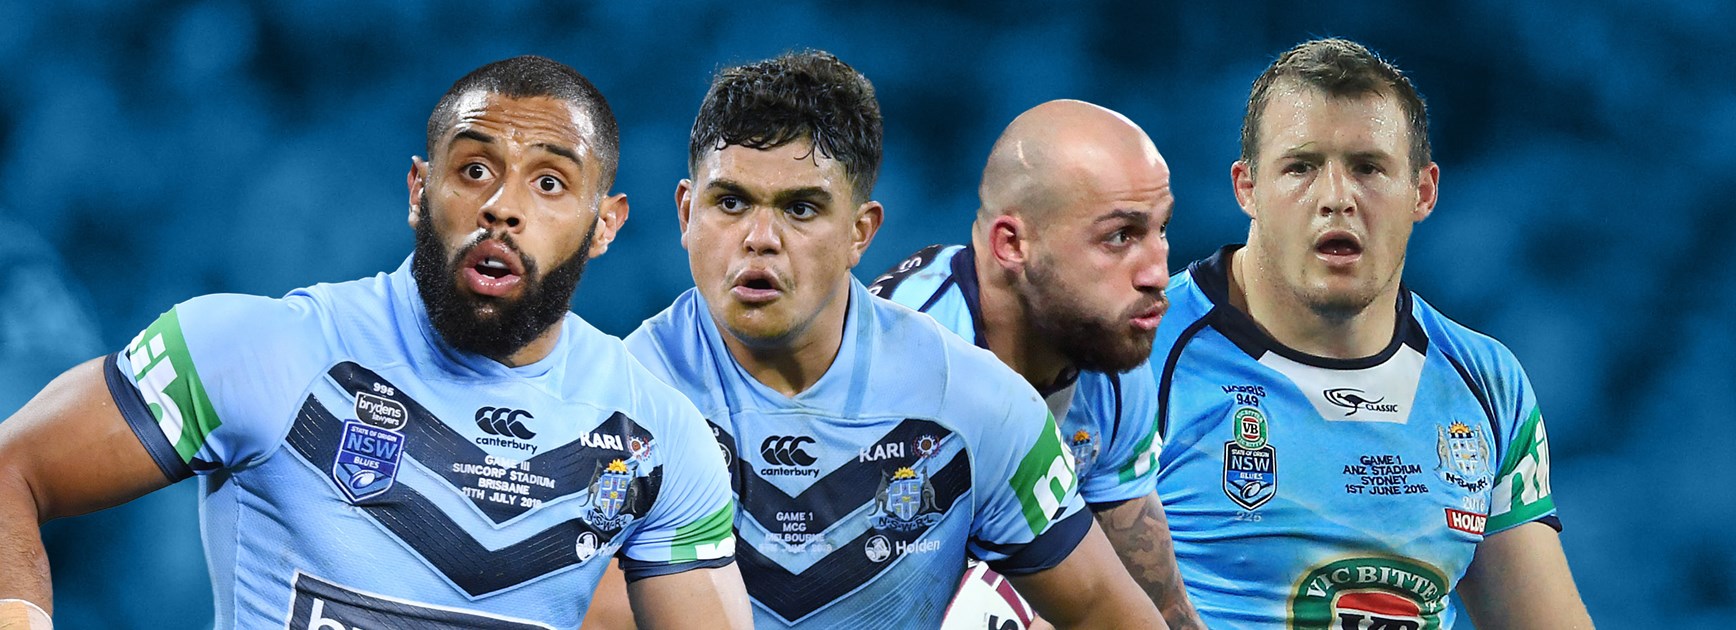 Ranking the Blues backs candidates for 2019 Origin